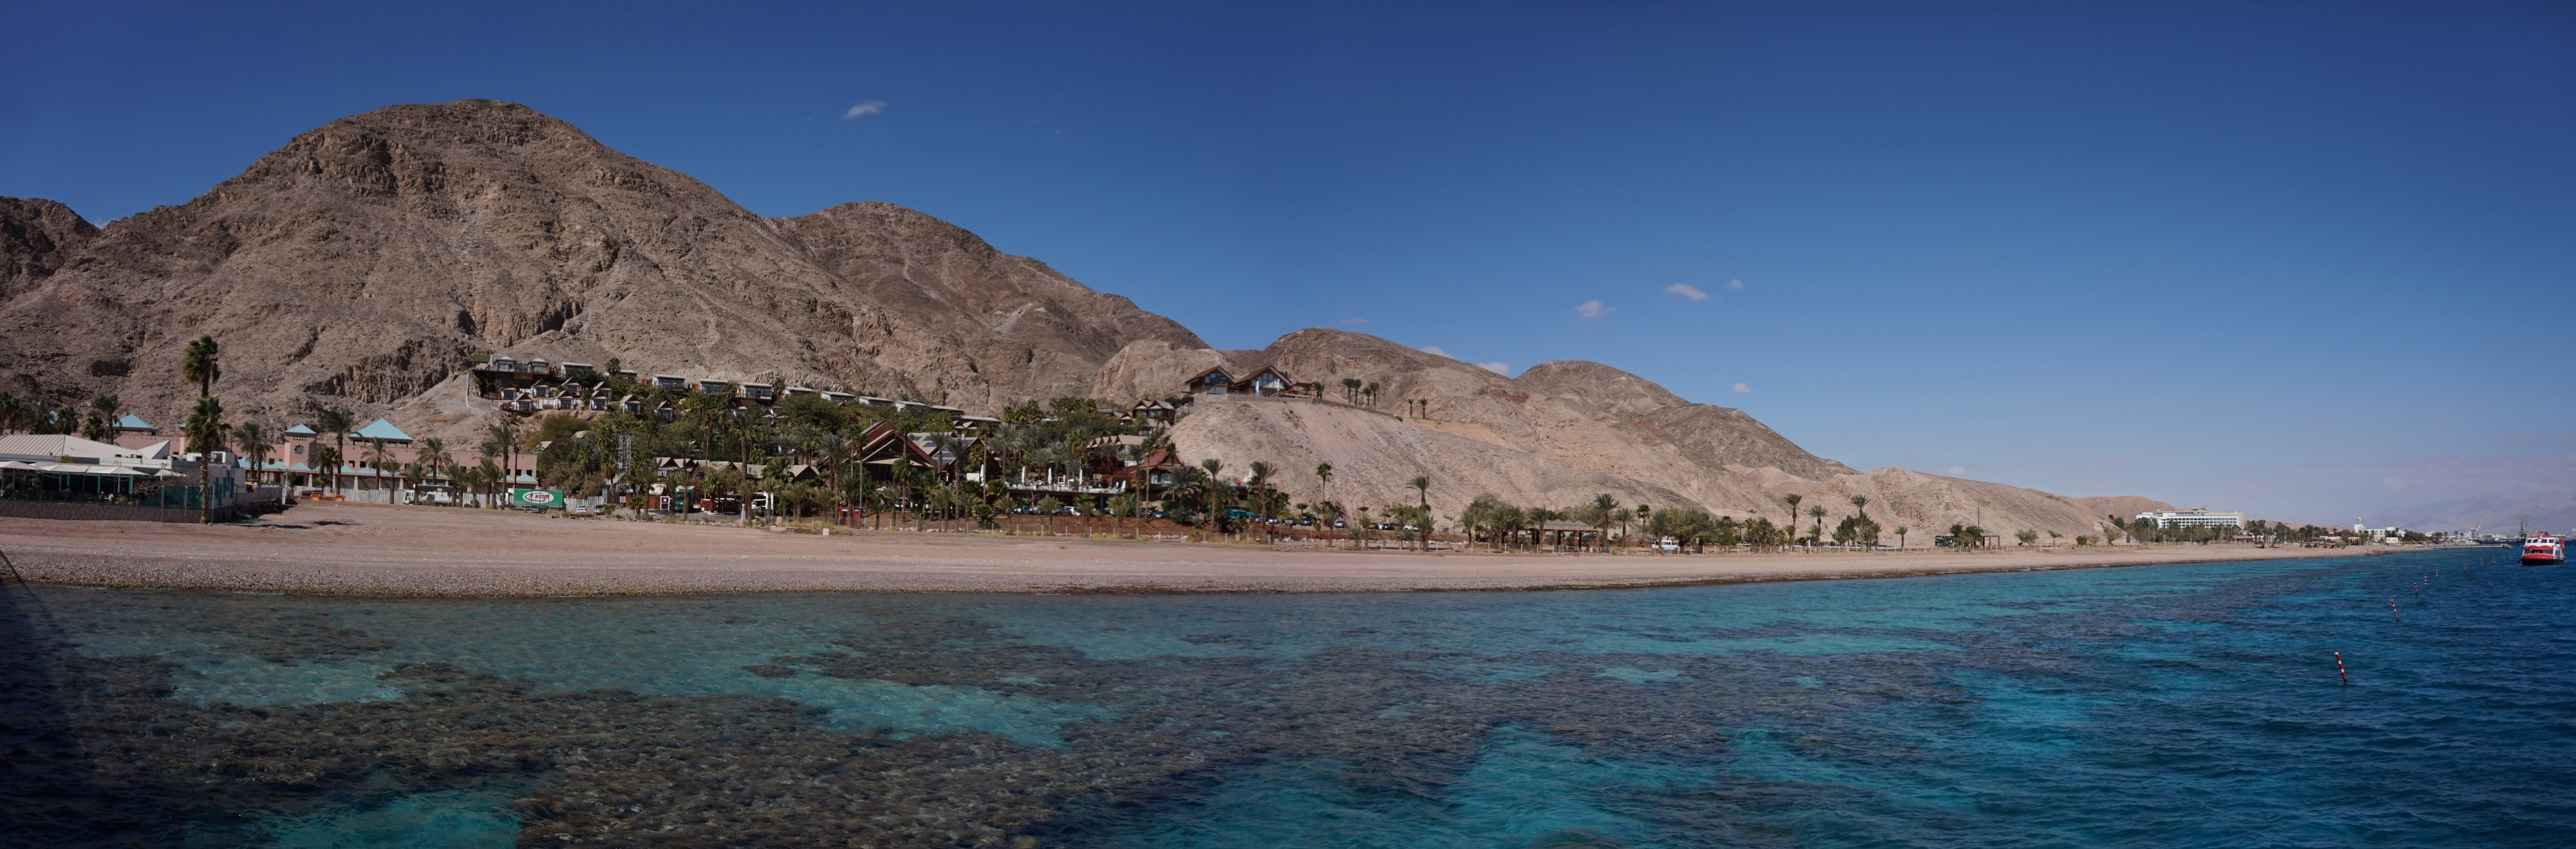 File:Eilat Red Sea - Wikimedia Commons